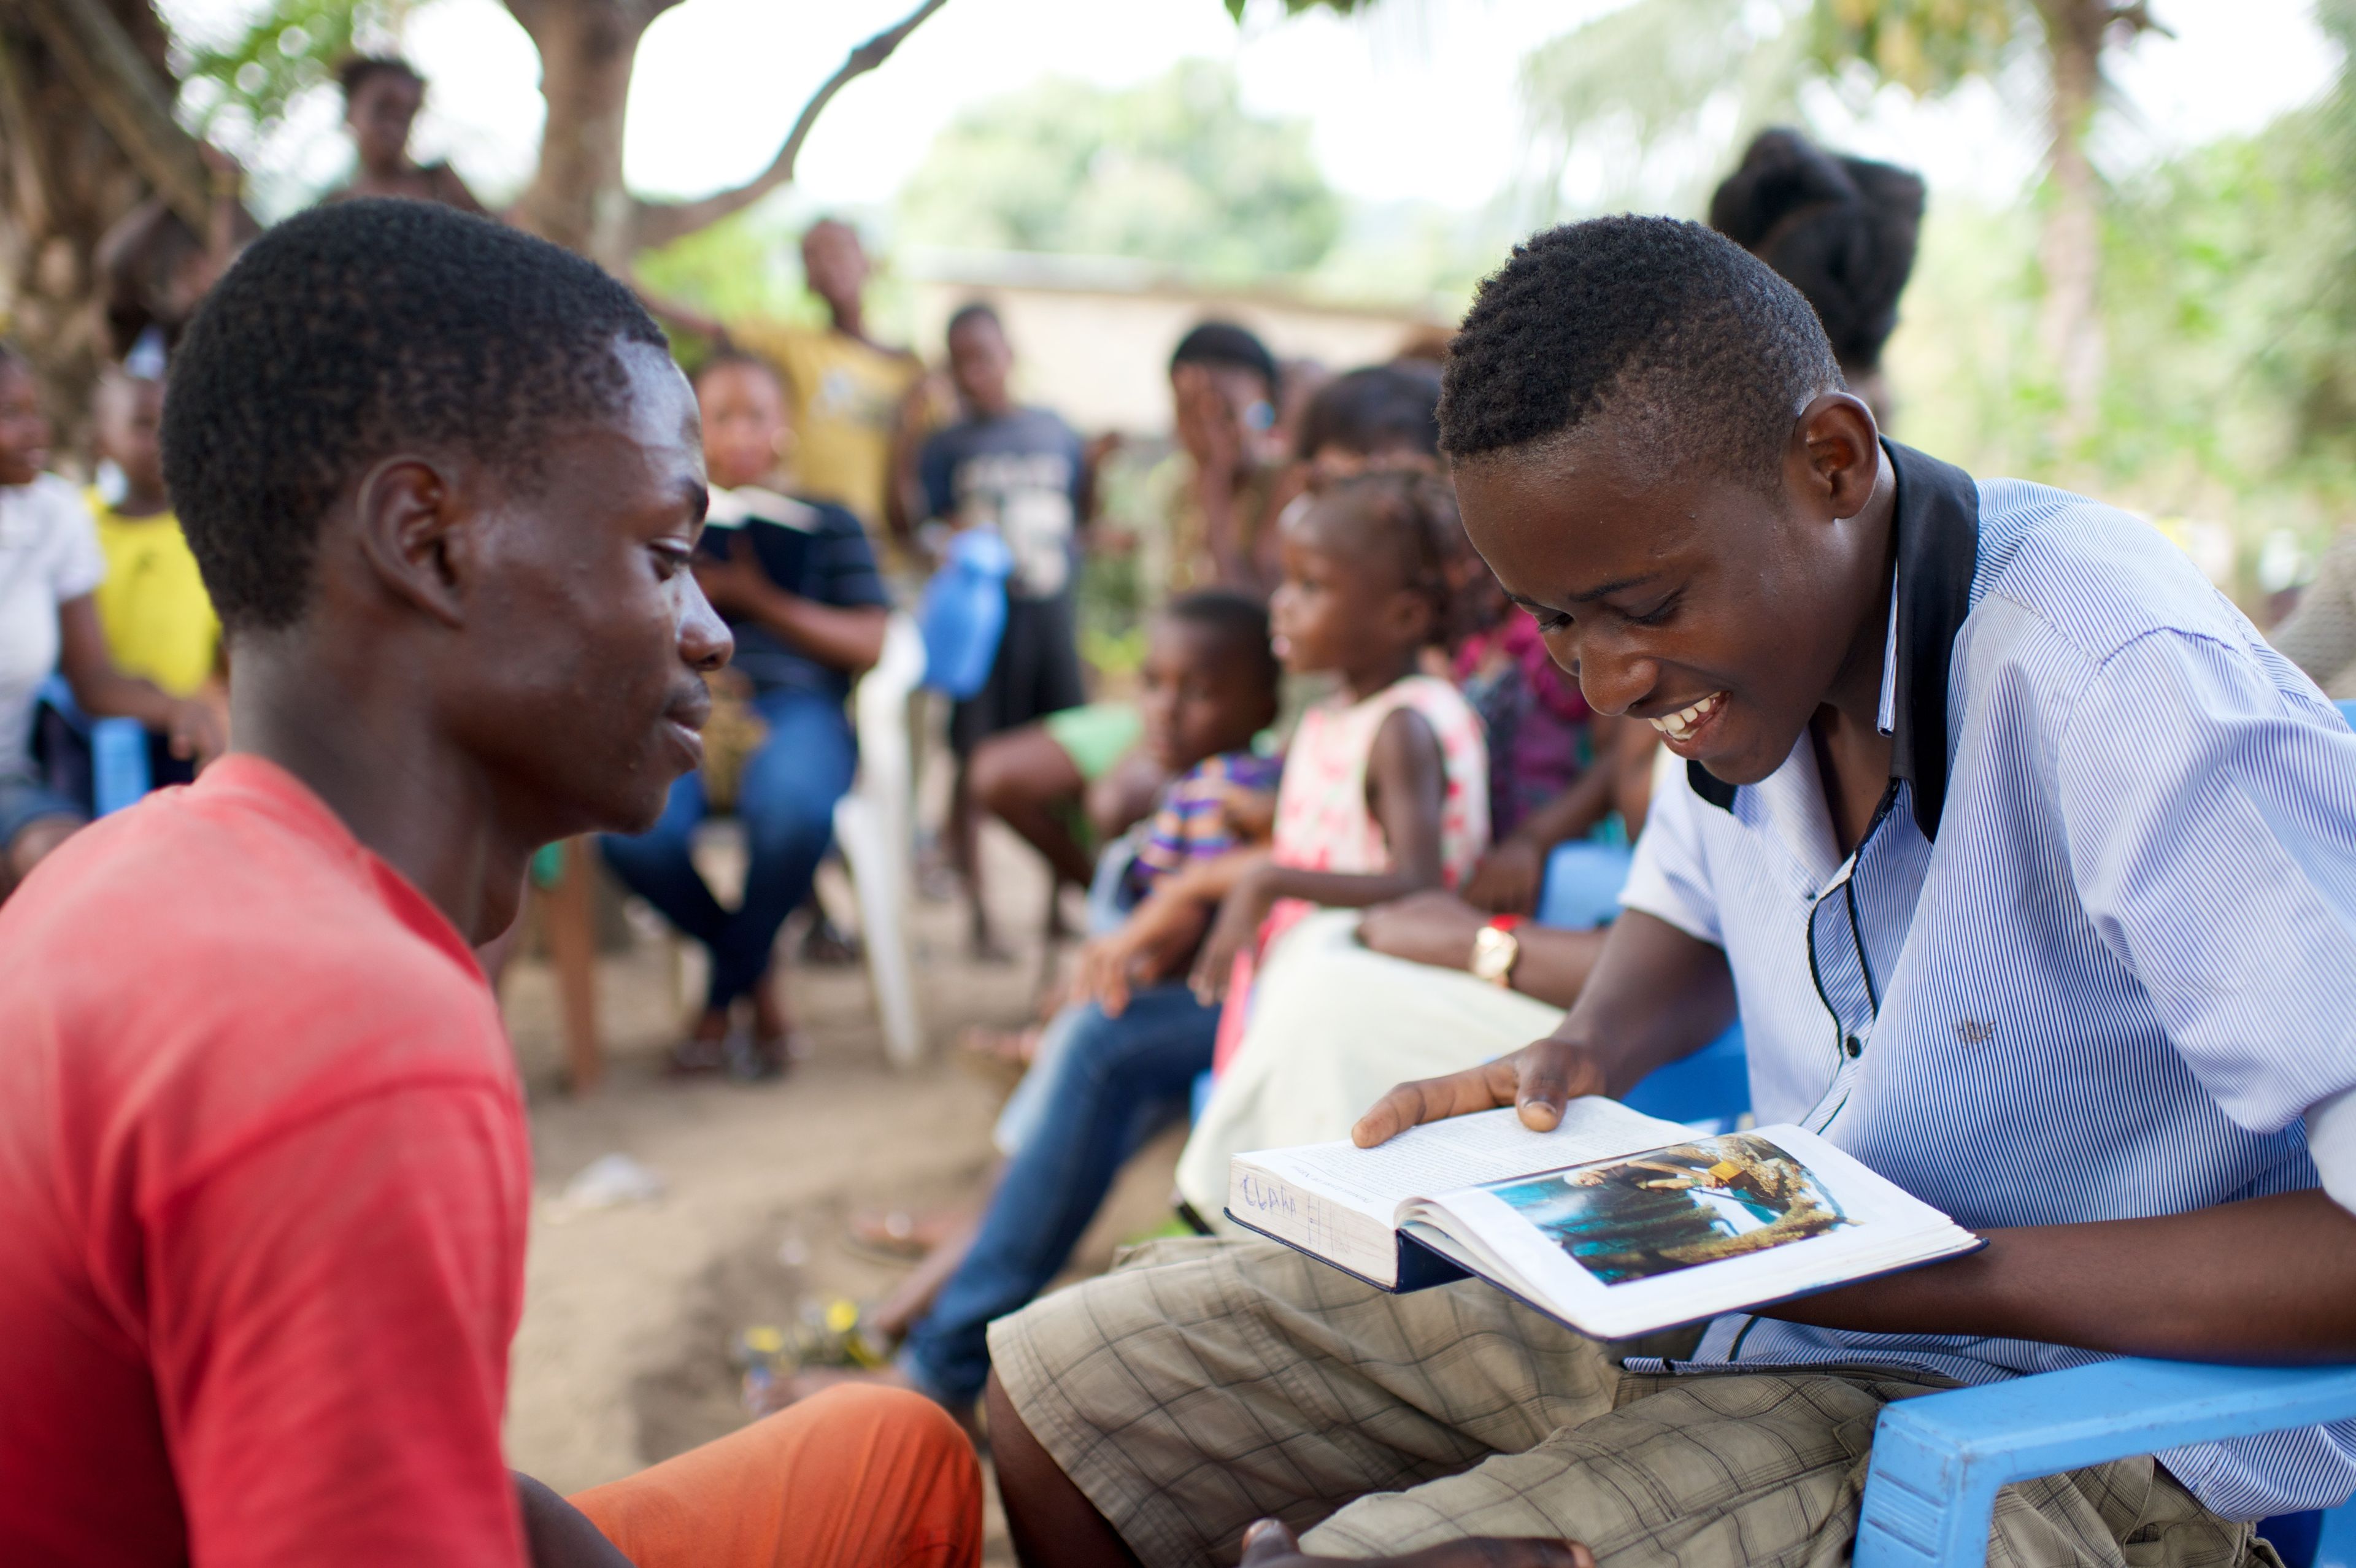 A young man from Africa sits in front of another young man as they look at a picture in the Book of Mormon.